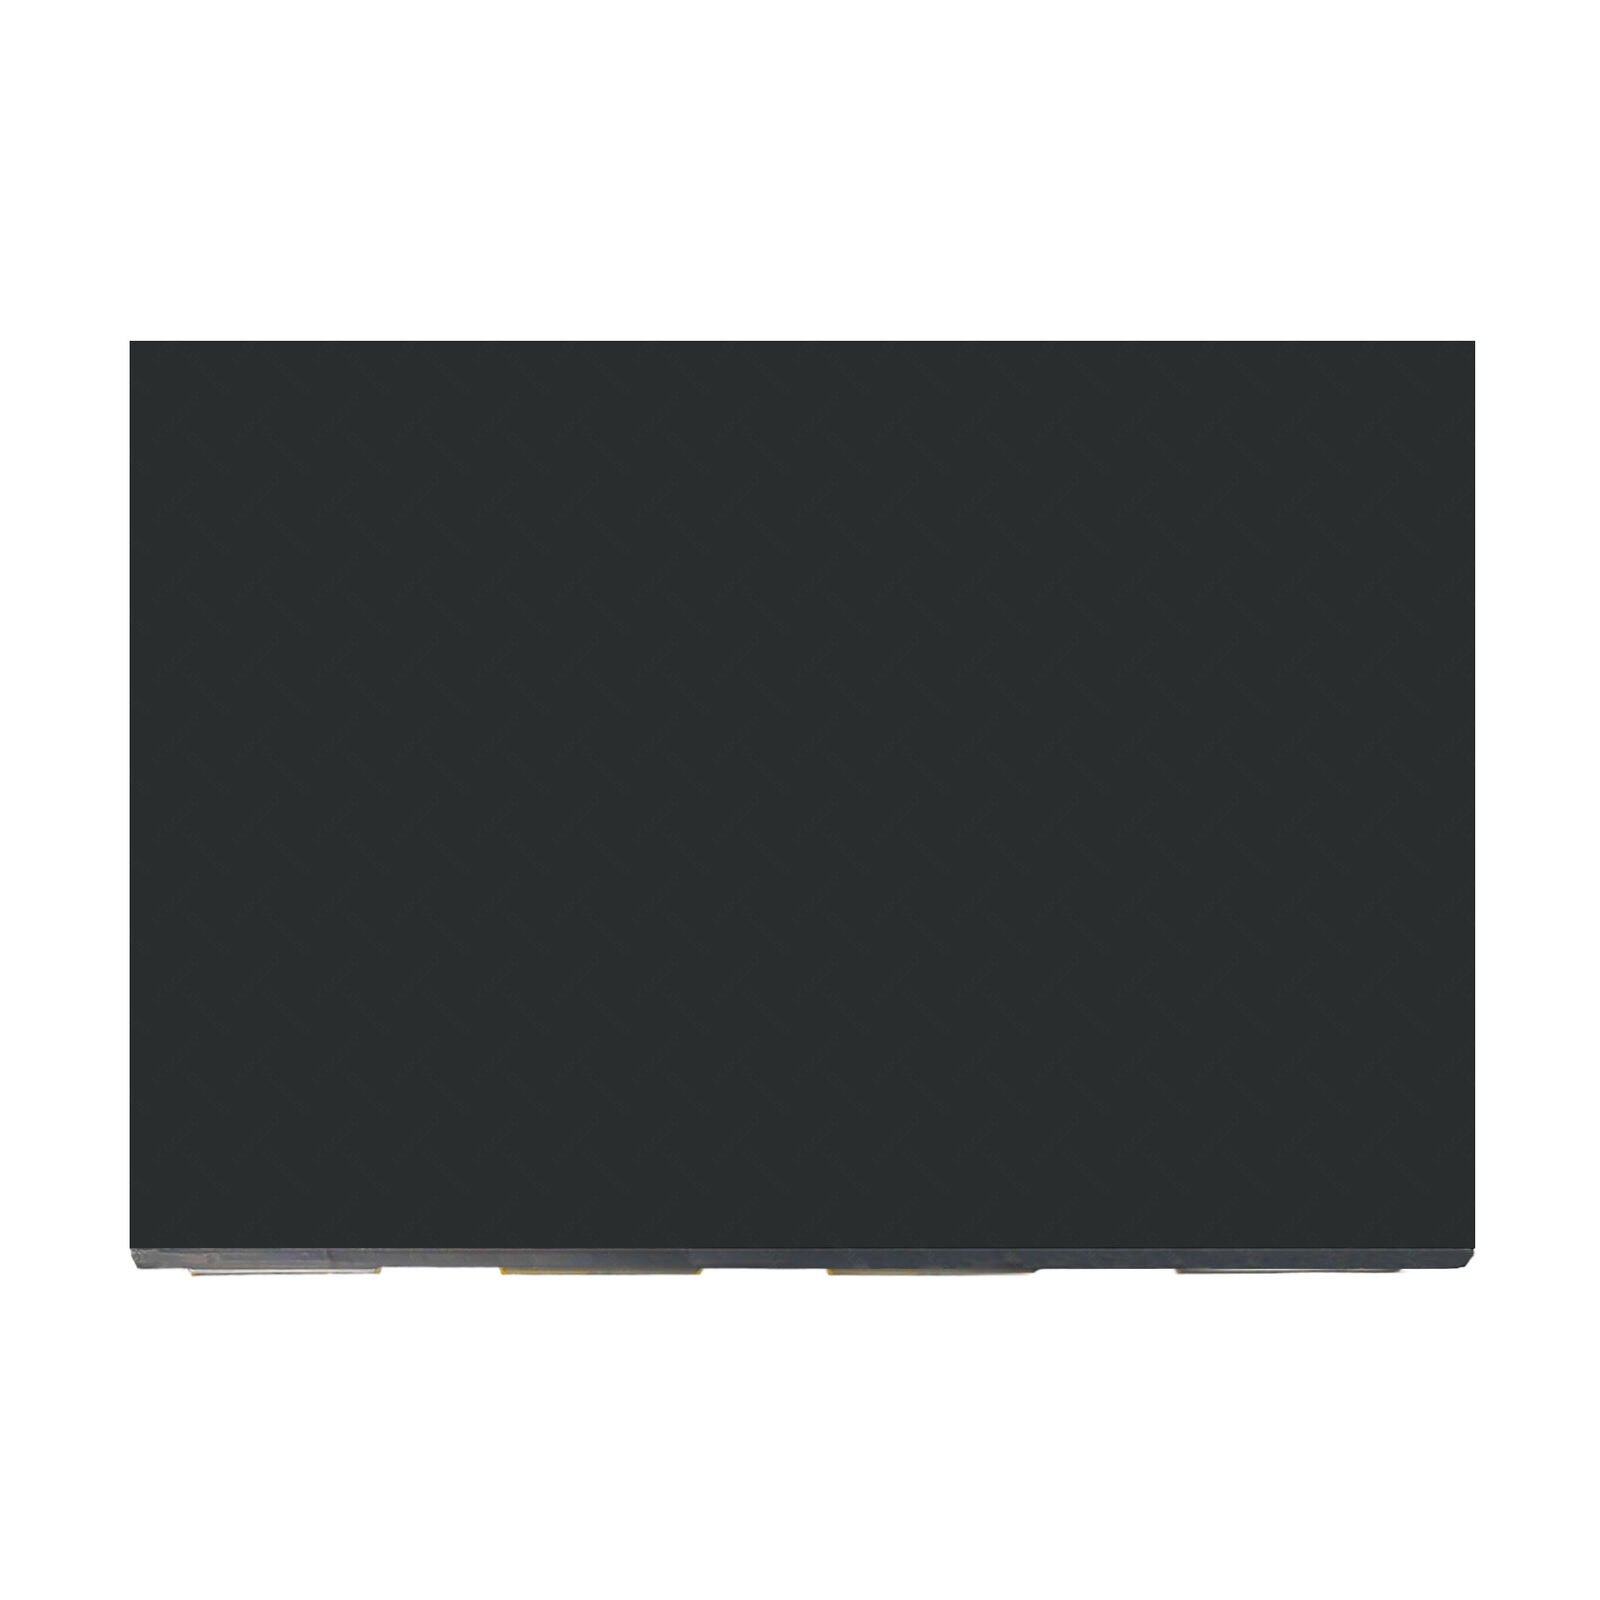 2.8K 16:10 OLED LCD Display Screen Panel Replacement for ASUS Zenbook 14 Q409ZA